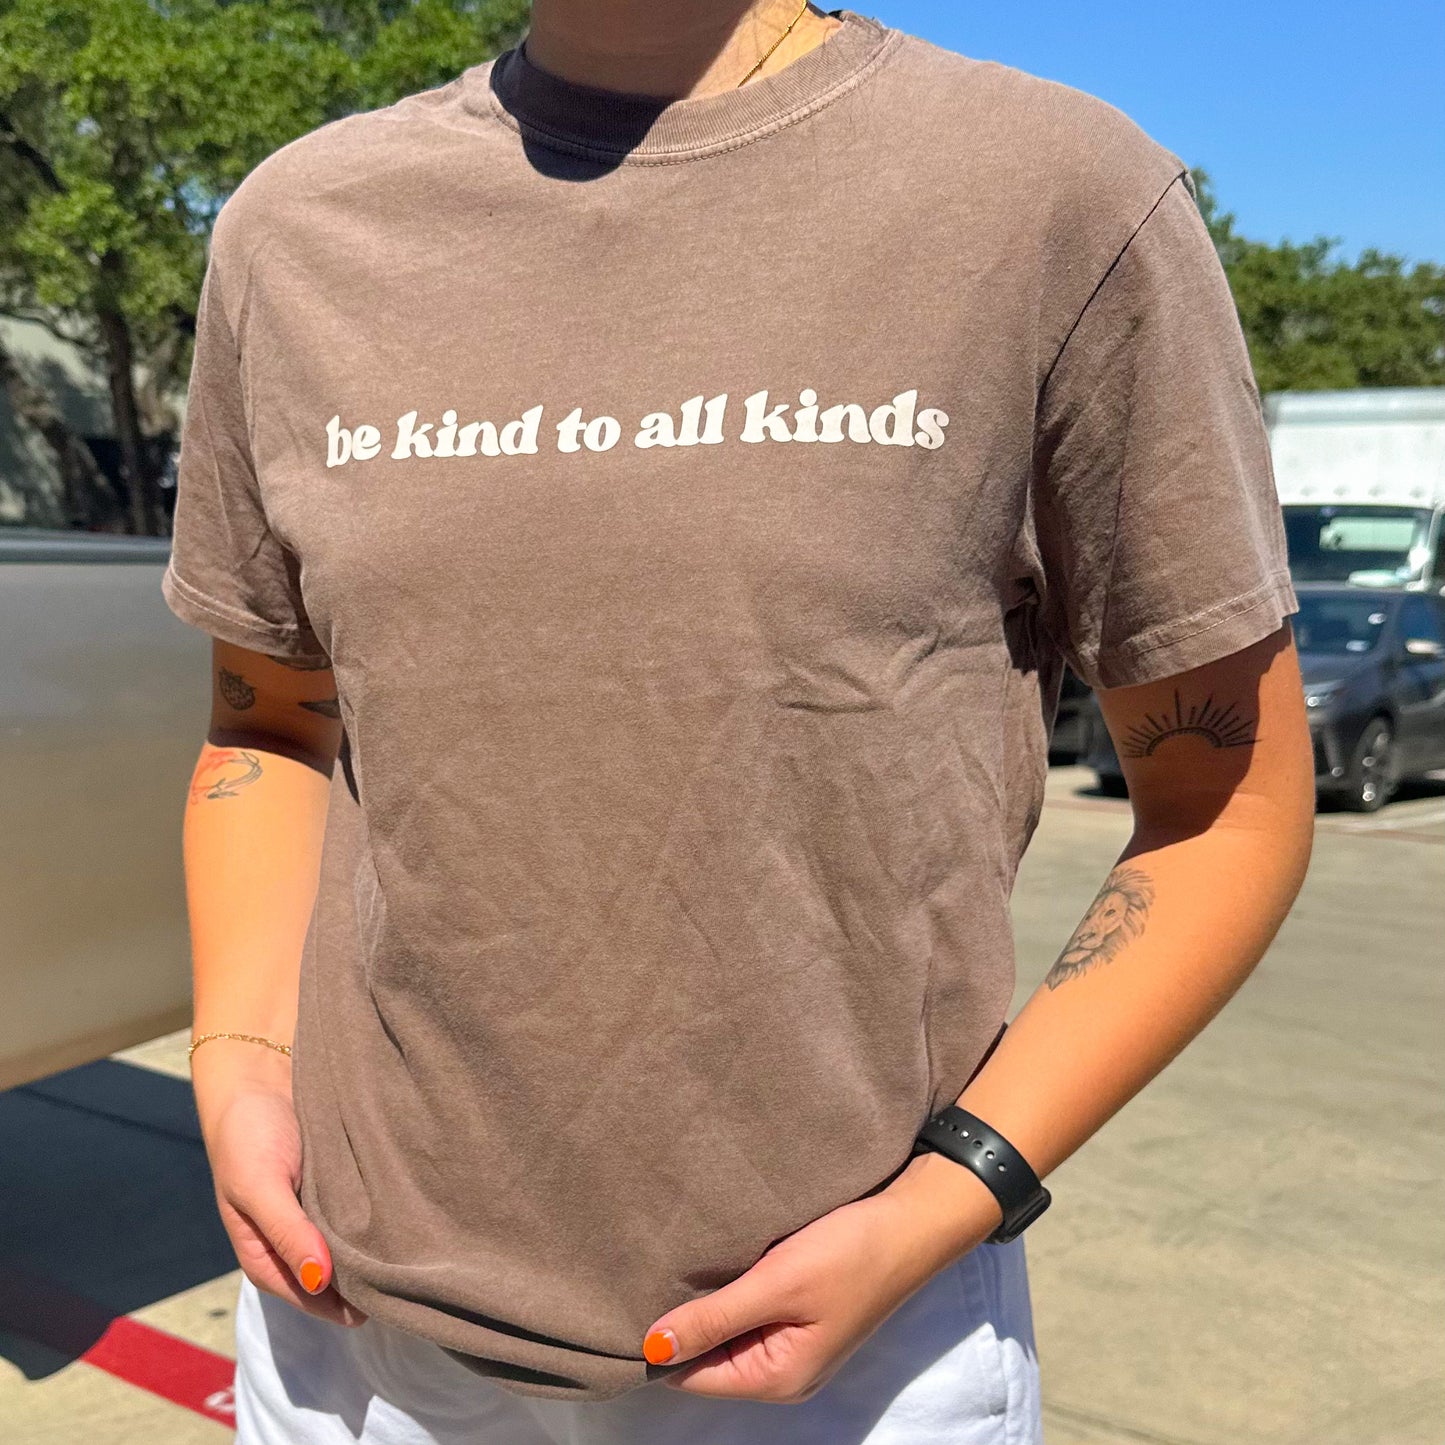 Be kind to all kinds T-shirt - Brown